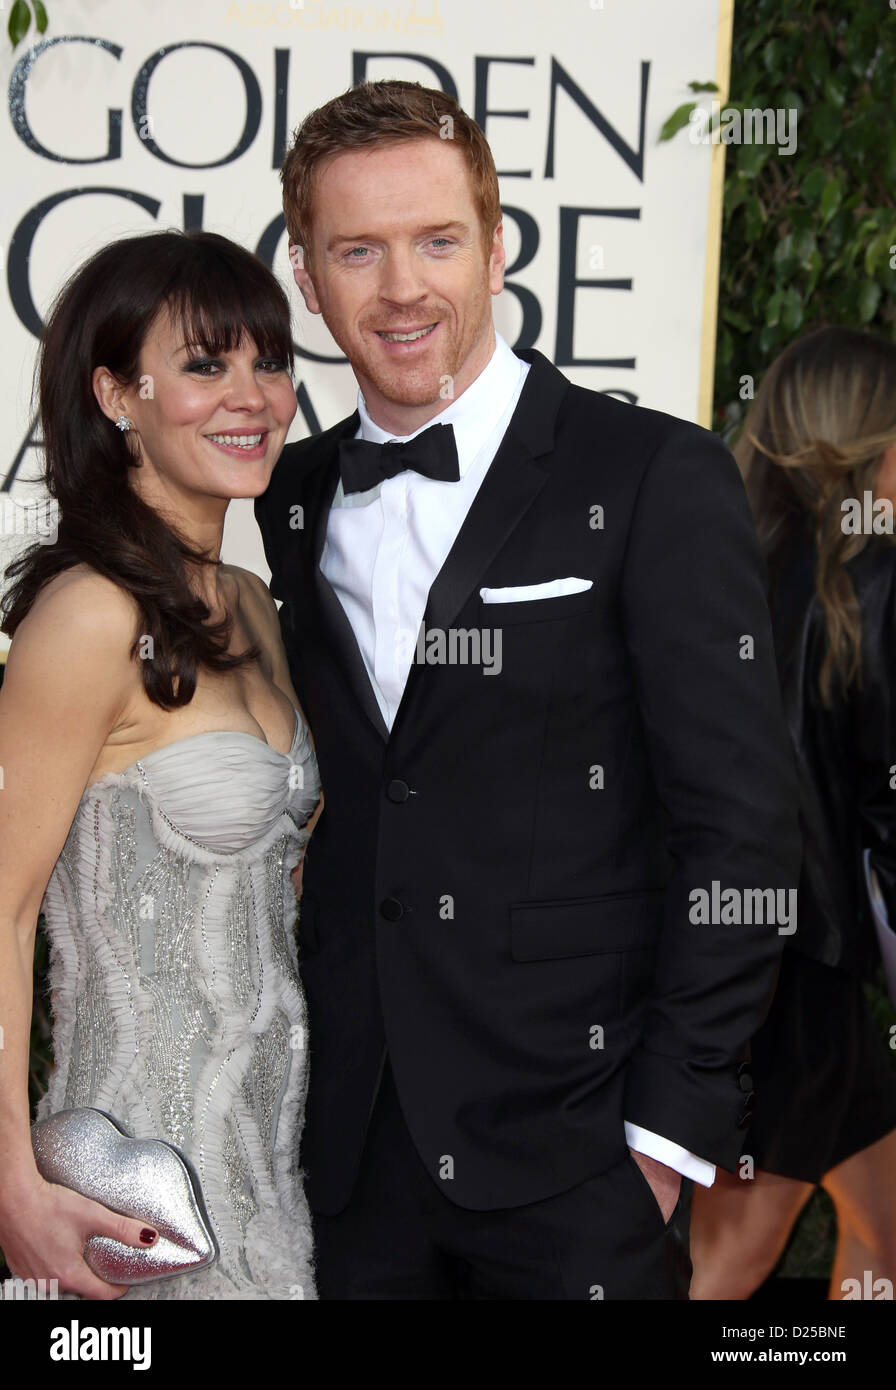 US actors Helen McCrory and Damian Lewis arrive at the 70th Annual Golden Globe Awards presented by the Hollywood Foreign Press Association, HFPA, at Hotel Beverly Hilton in Beverly Hills, USA, on 13 January 2013. Photo: Hubert Boesl Stock Photo